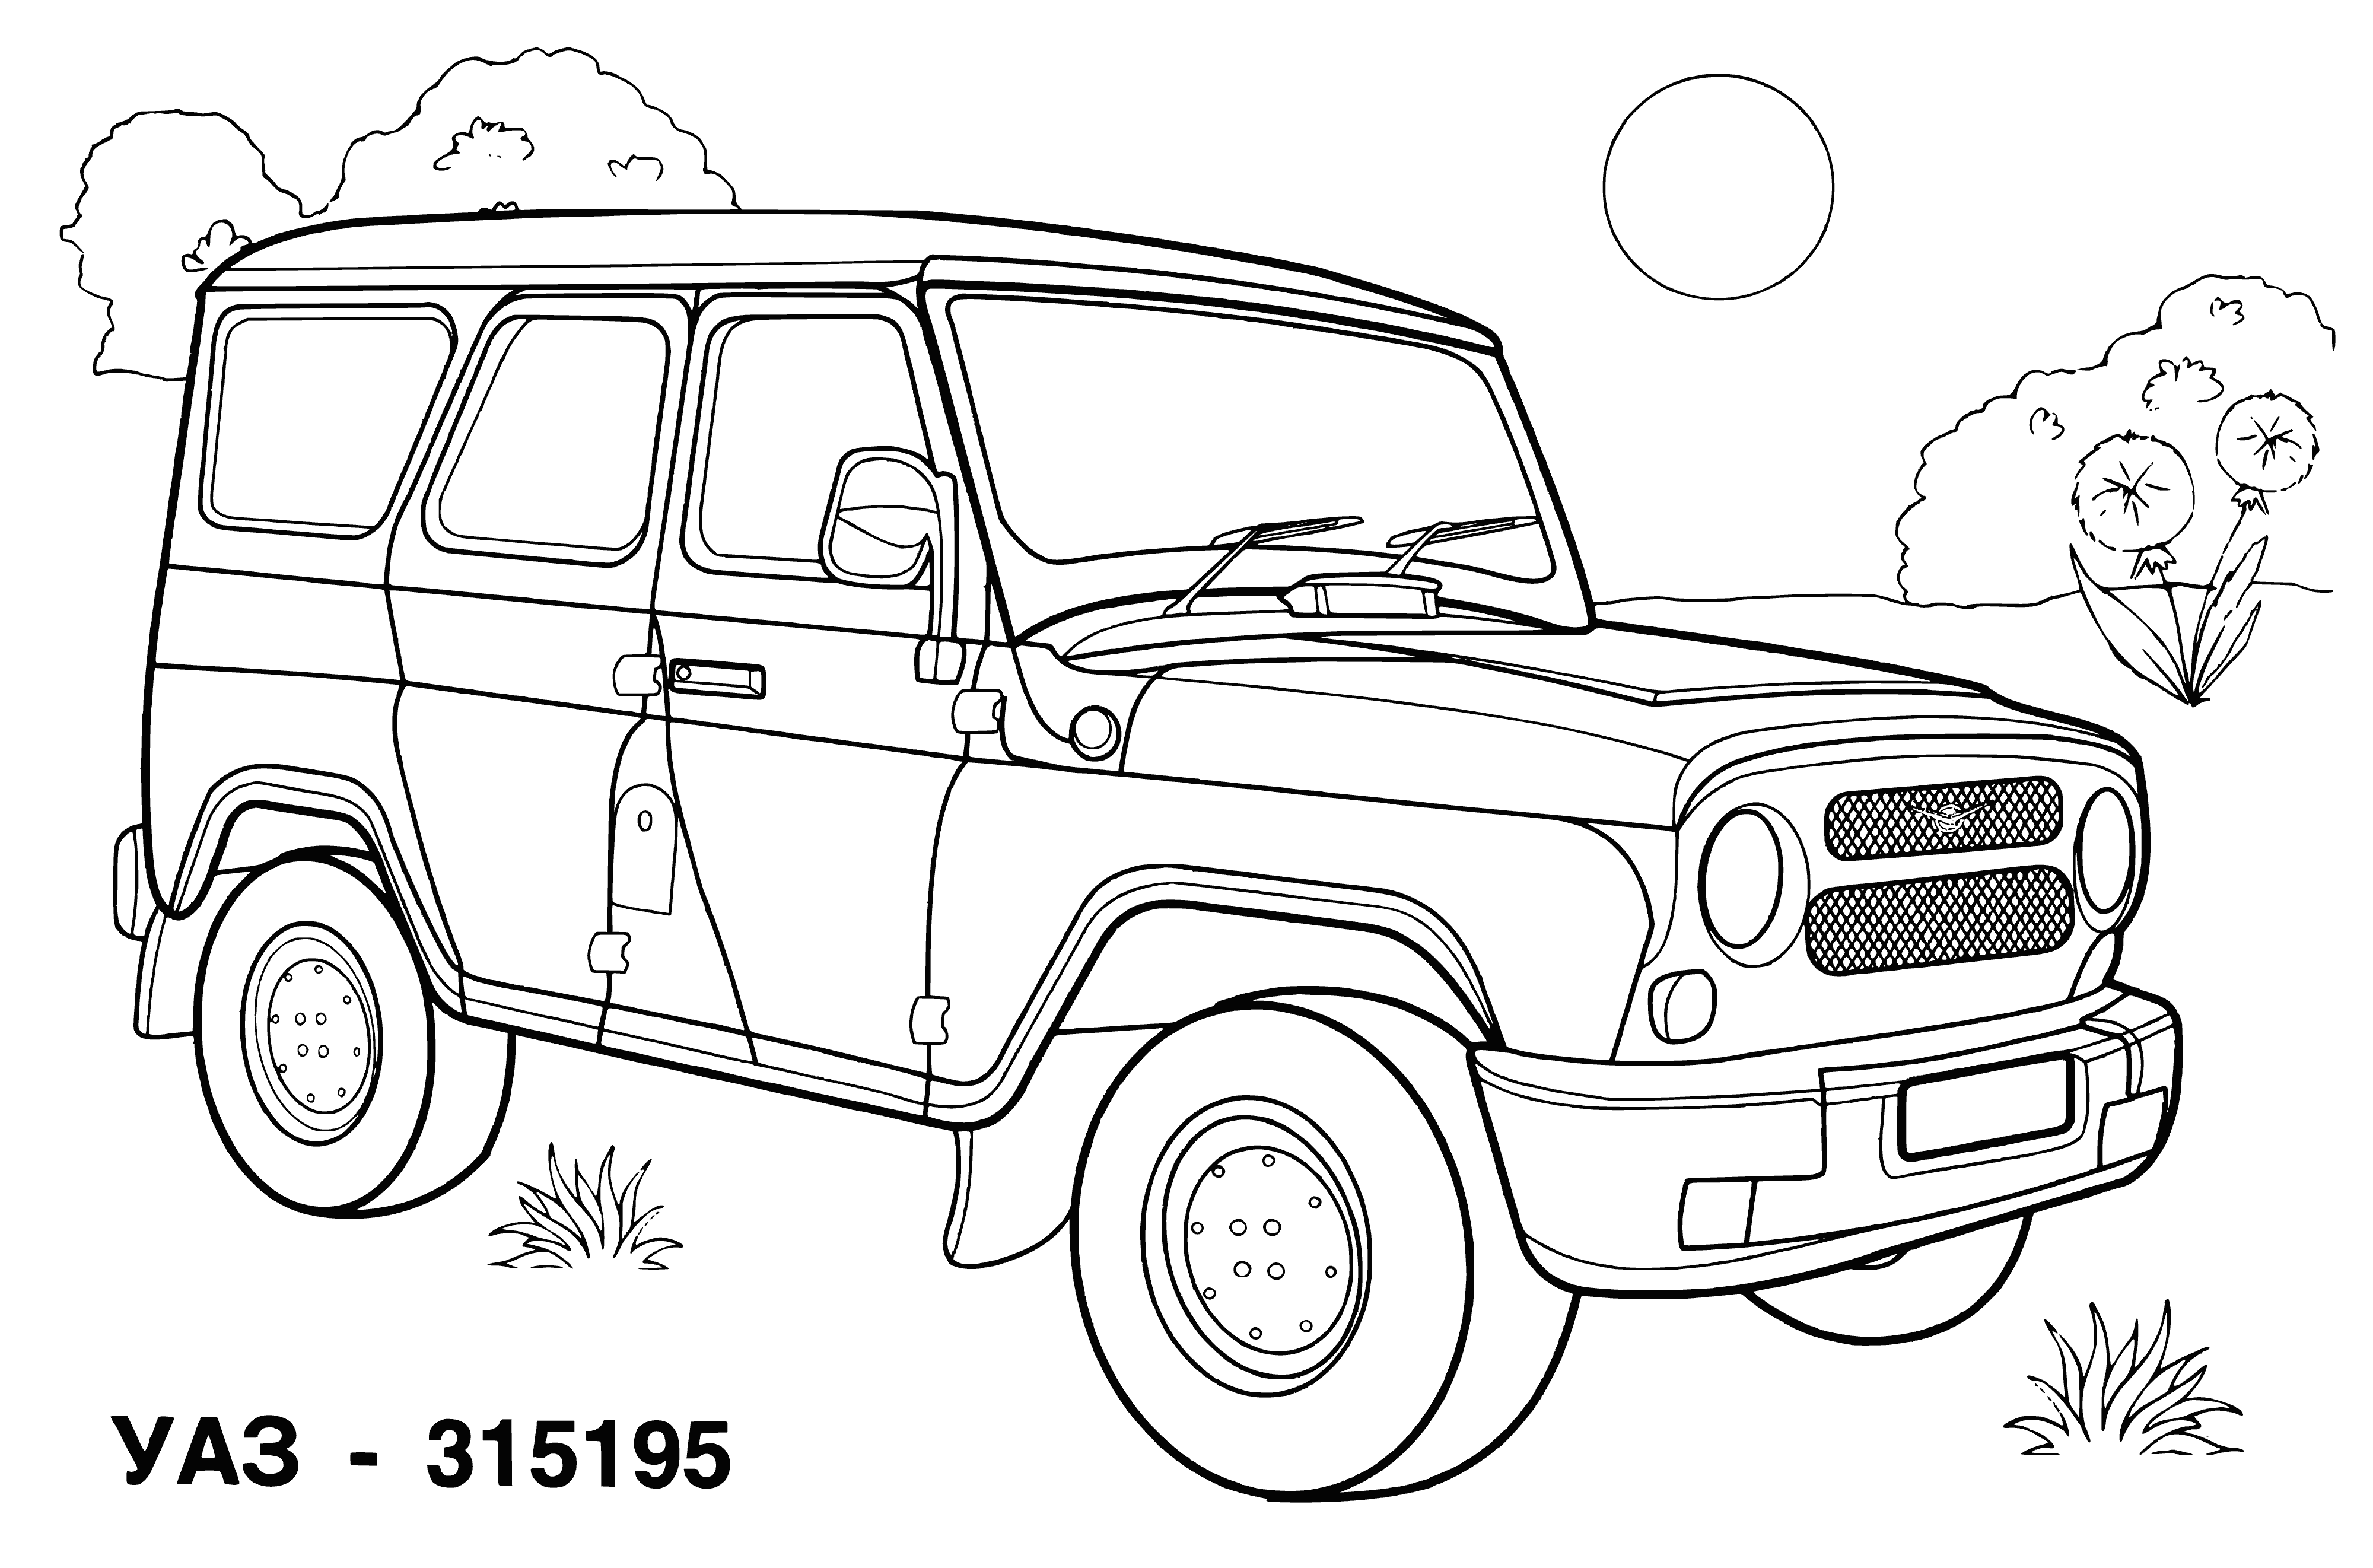 coloring page: Three green Jeeps of different sizes facing same direction in a coloring page. #colorlife #jeeps #uaz